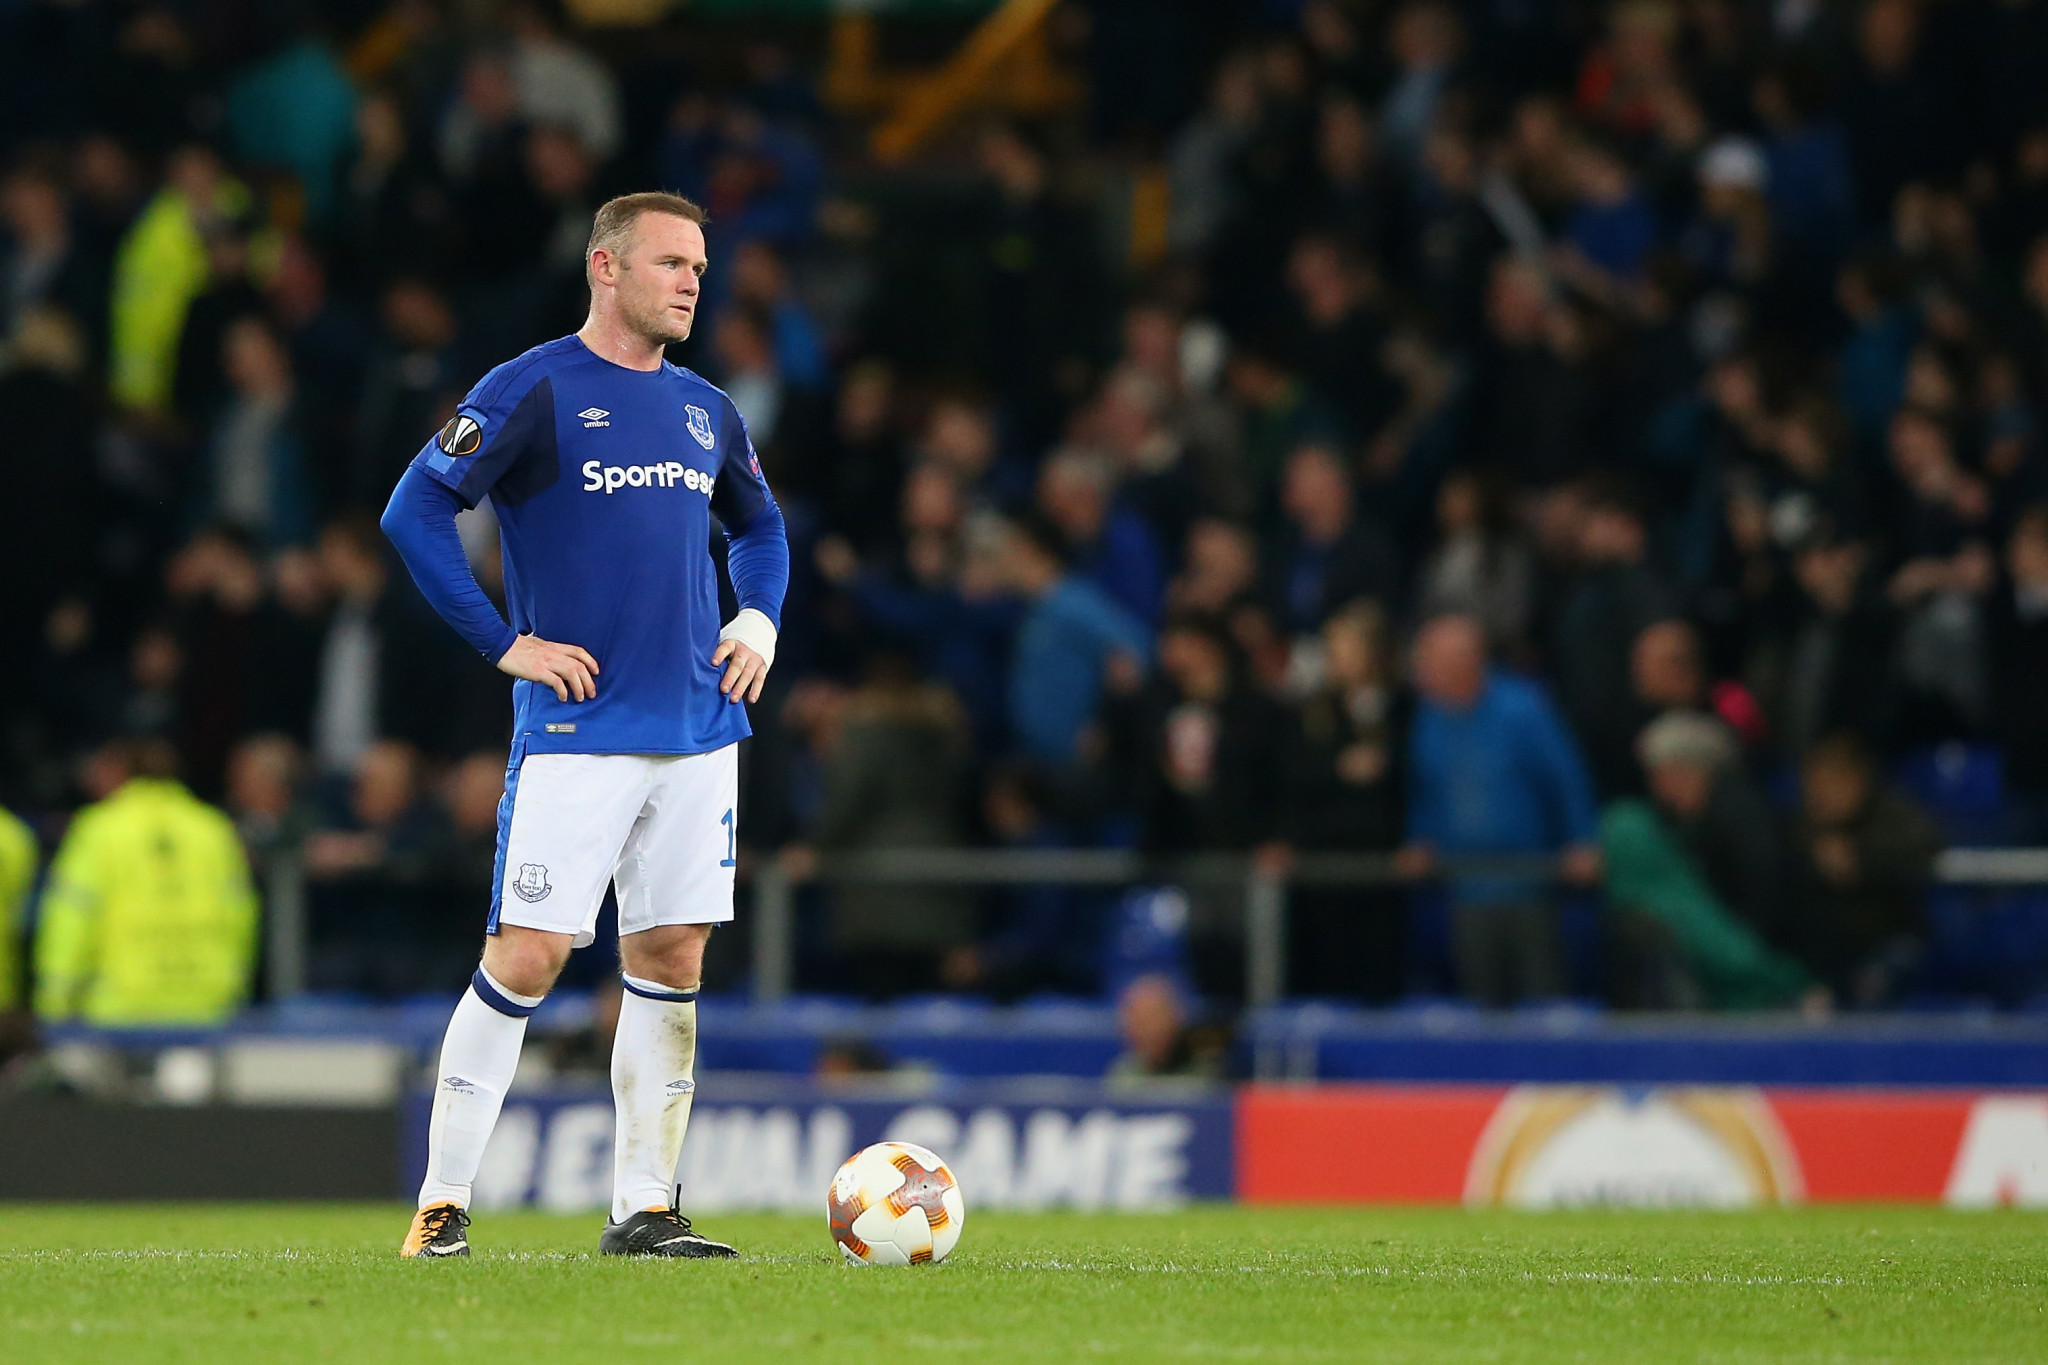 Wayne Rooney's lifestyle has been questioned throughout his career ©Getty Images